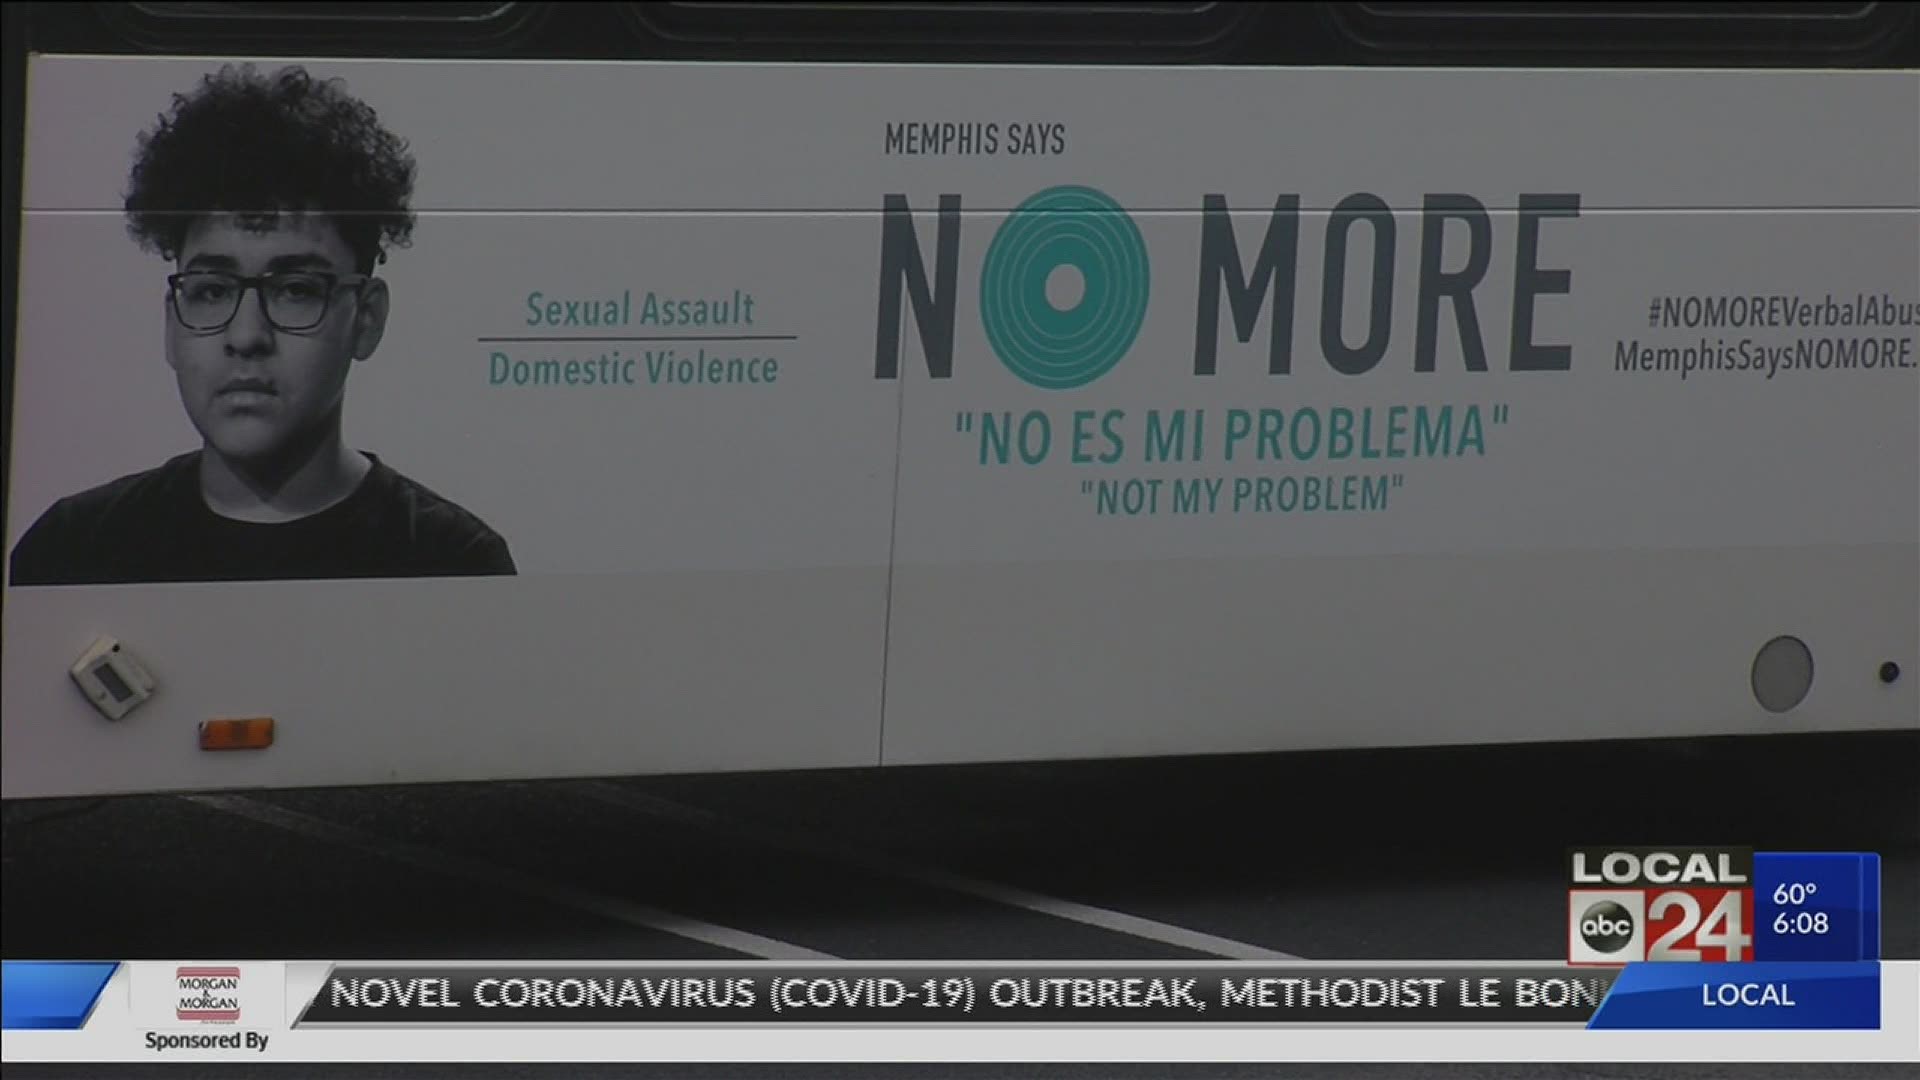 “Memphis Says NO MORE” has linked with MATA to bring new signage as a reminder in the fight against domestic and sexual assault.